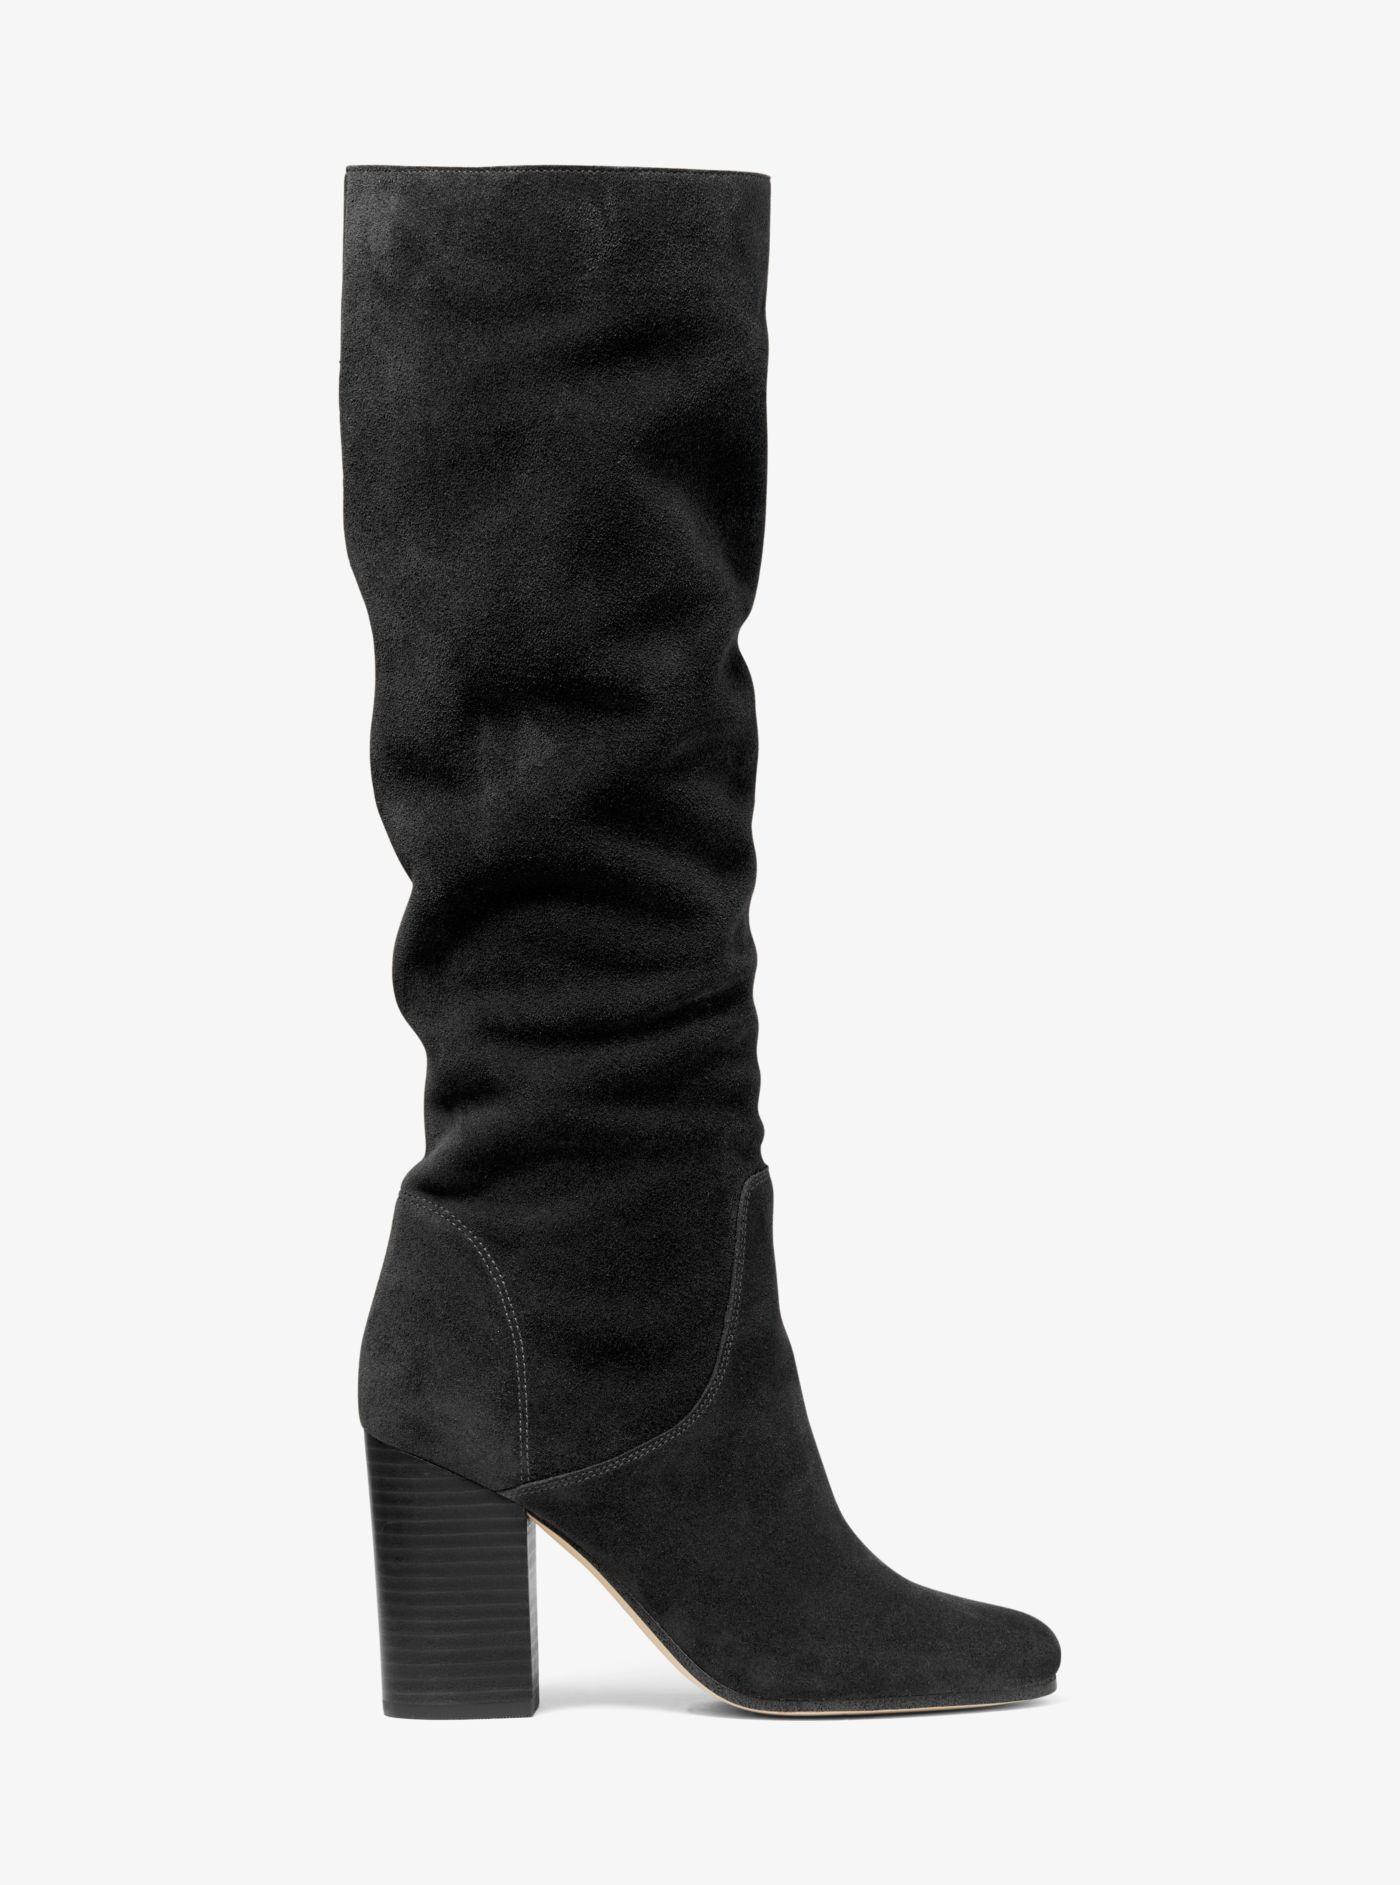 Michael Kors Leigh Suede Boot in Black - Lyst